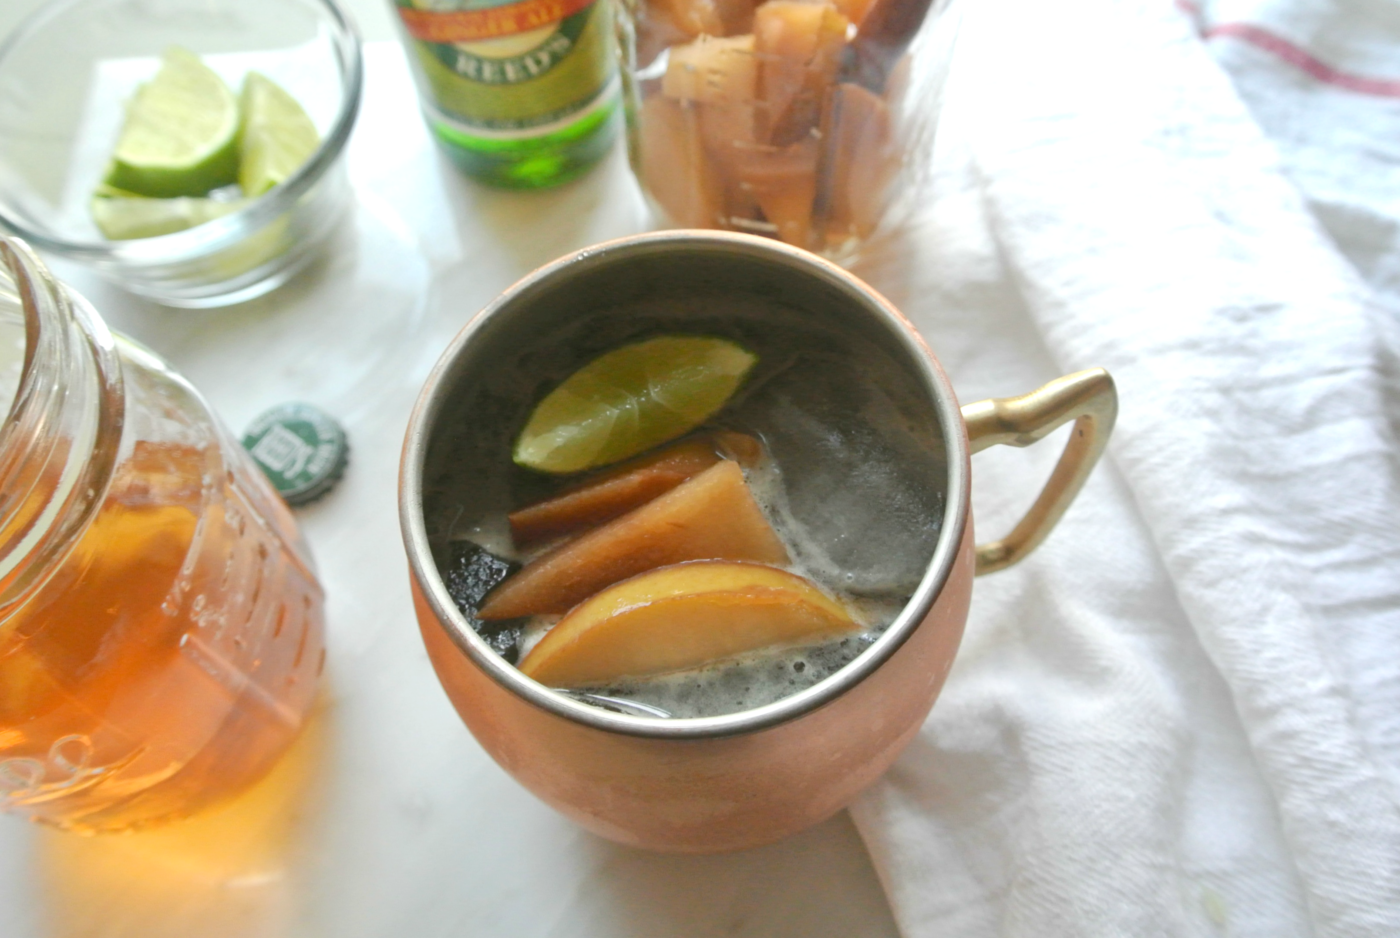 Pear Moscow mules are the perfect way to ease into fall. It's delicious, crisp and easy to create.